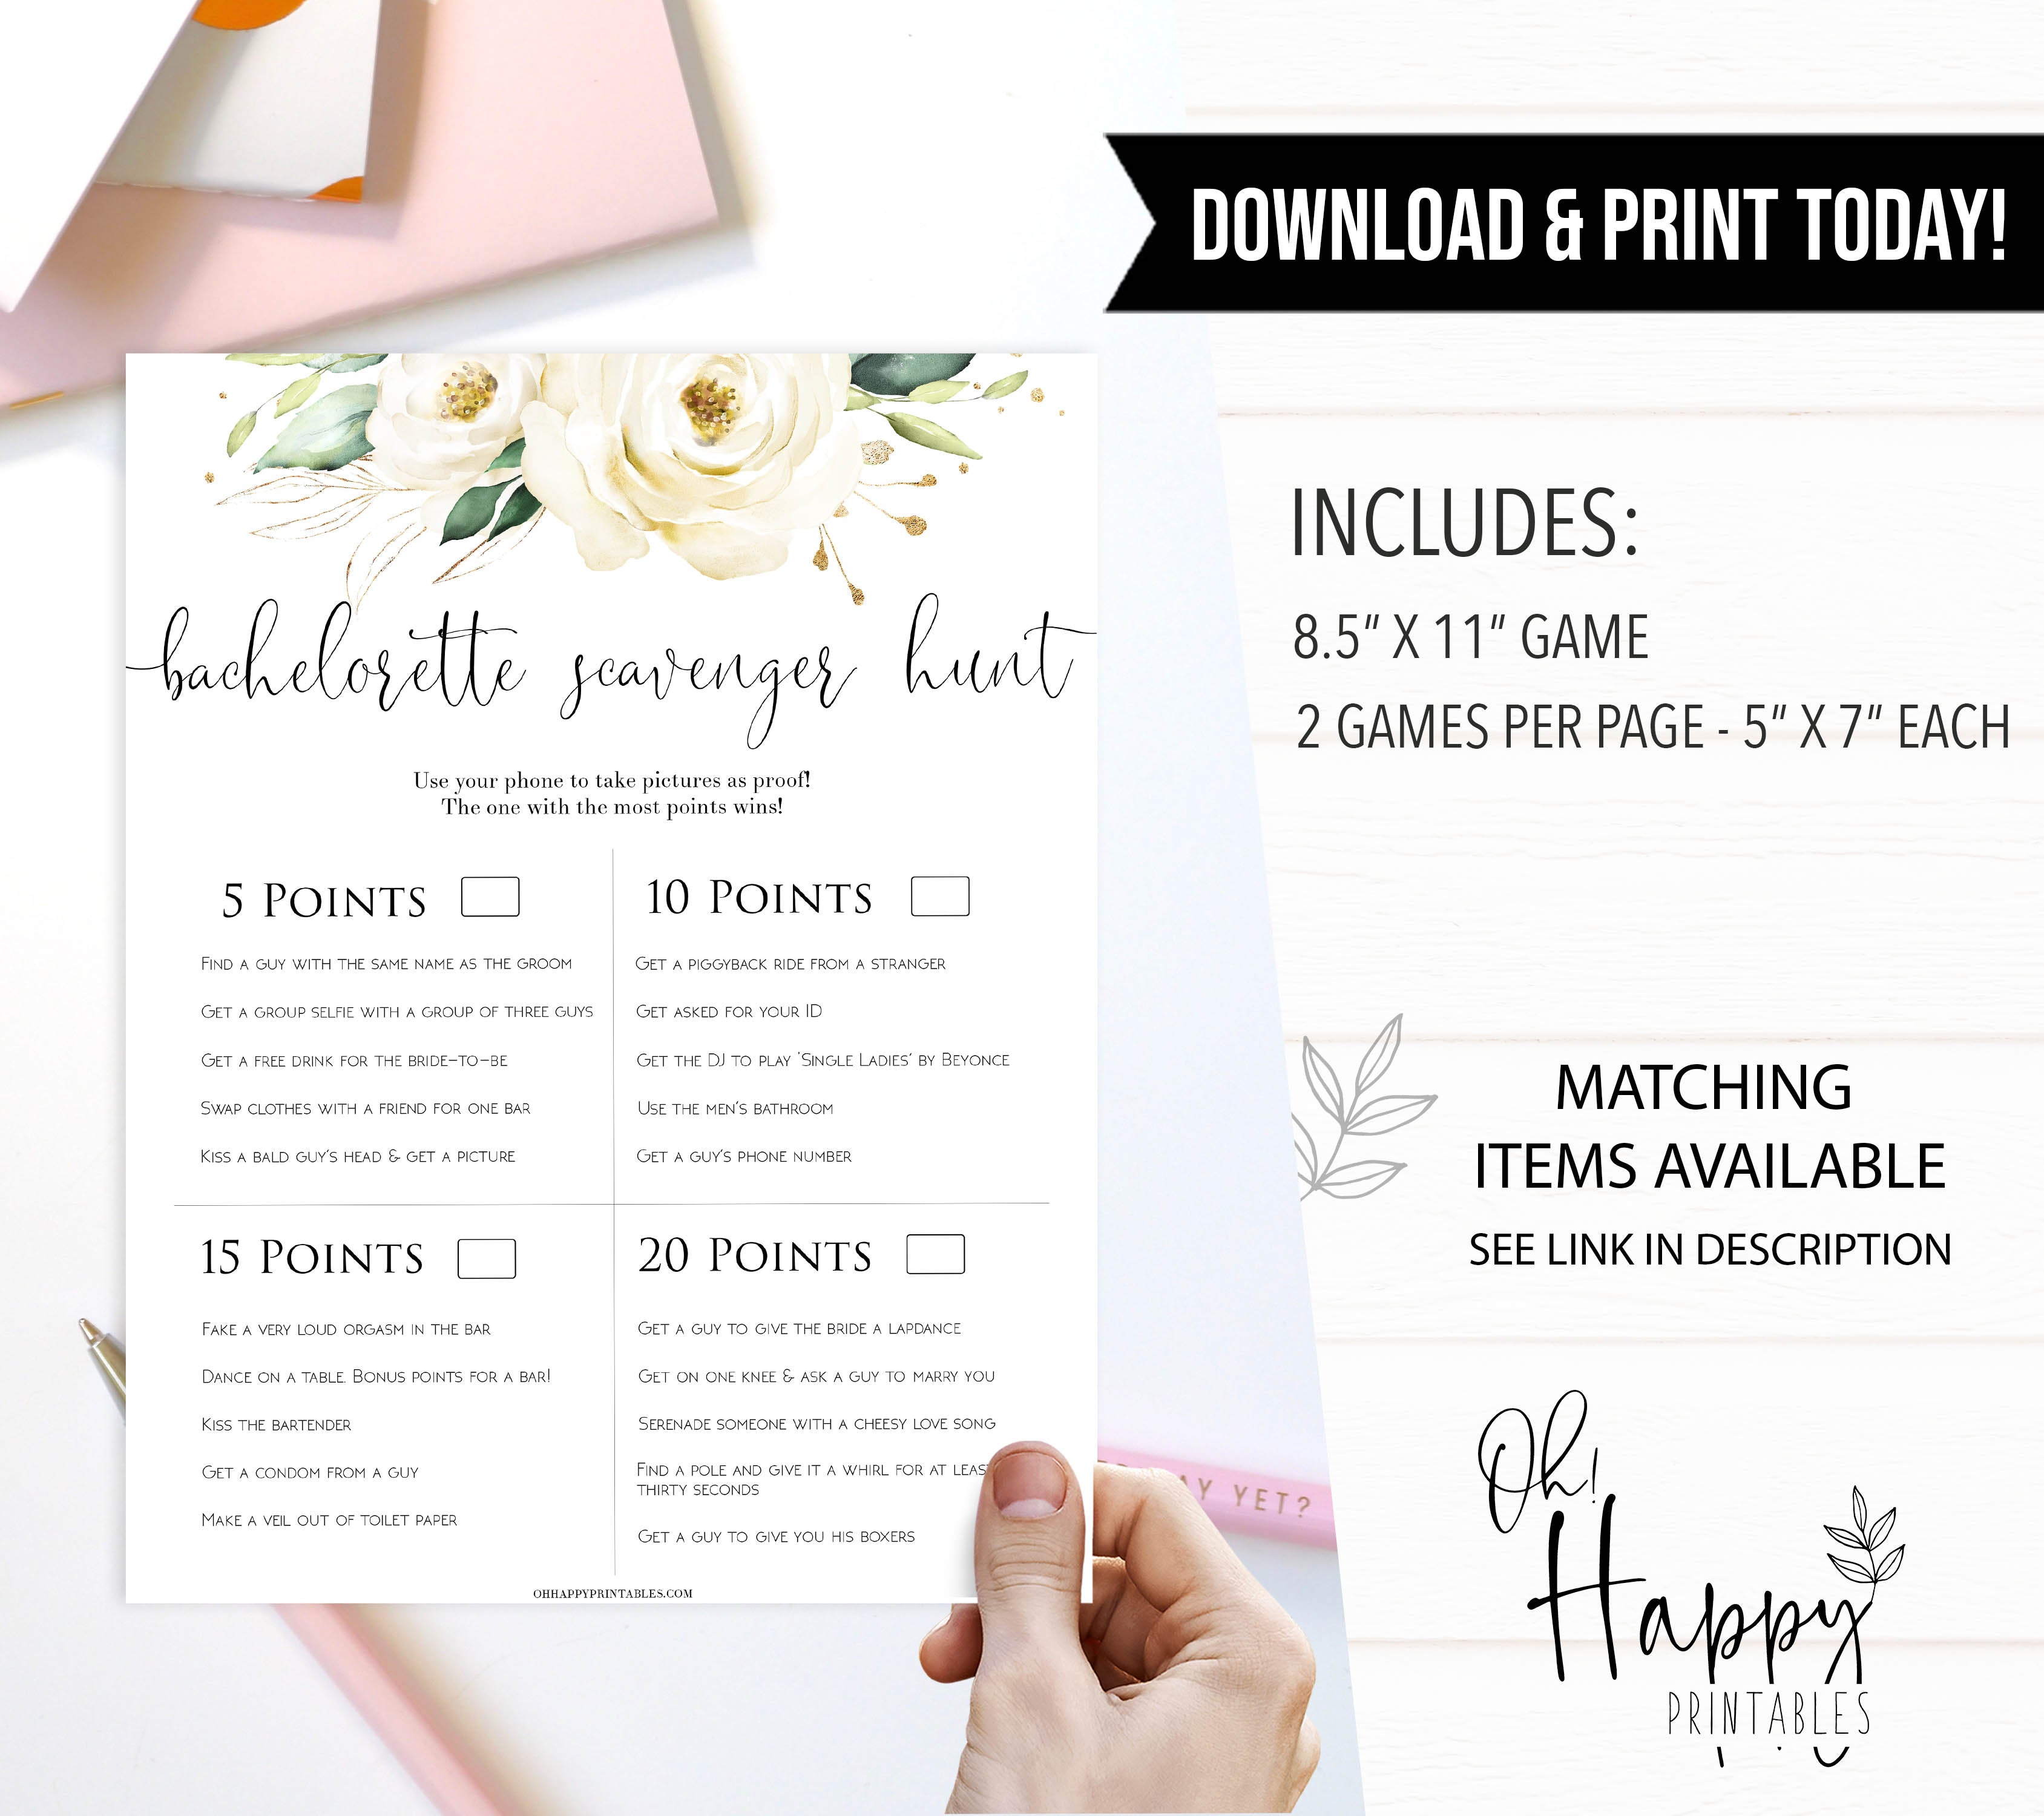 bachelorette scavenger hunt game, Printable bachelorette games, floral bachelorette, floral hen party games, fun hen party games, bachelorette game ideas, floral adult party games, naughty hen games, naughty bachelorette games